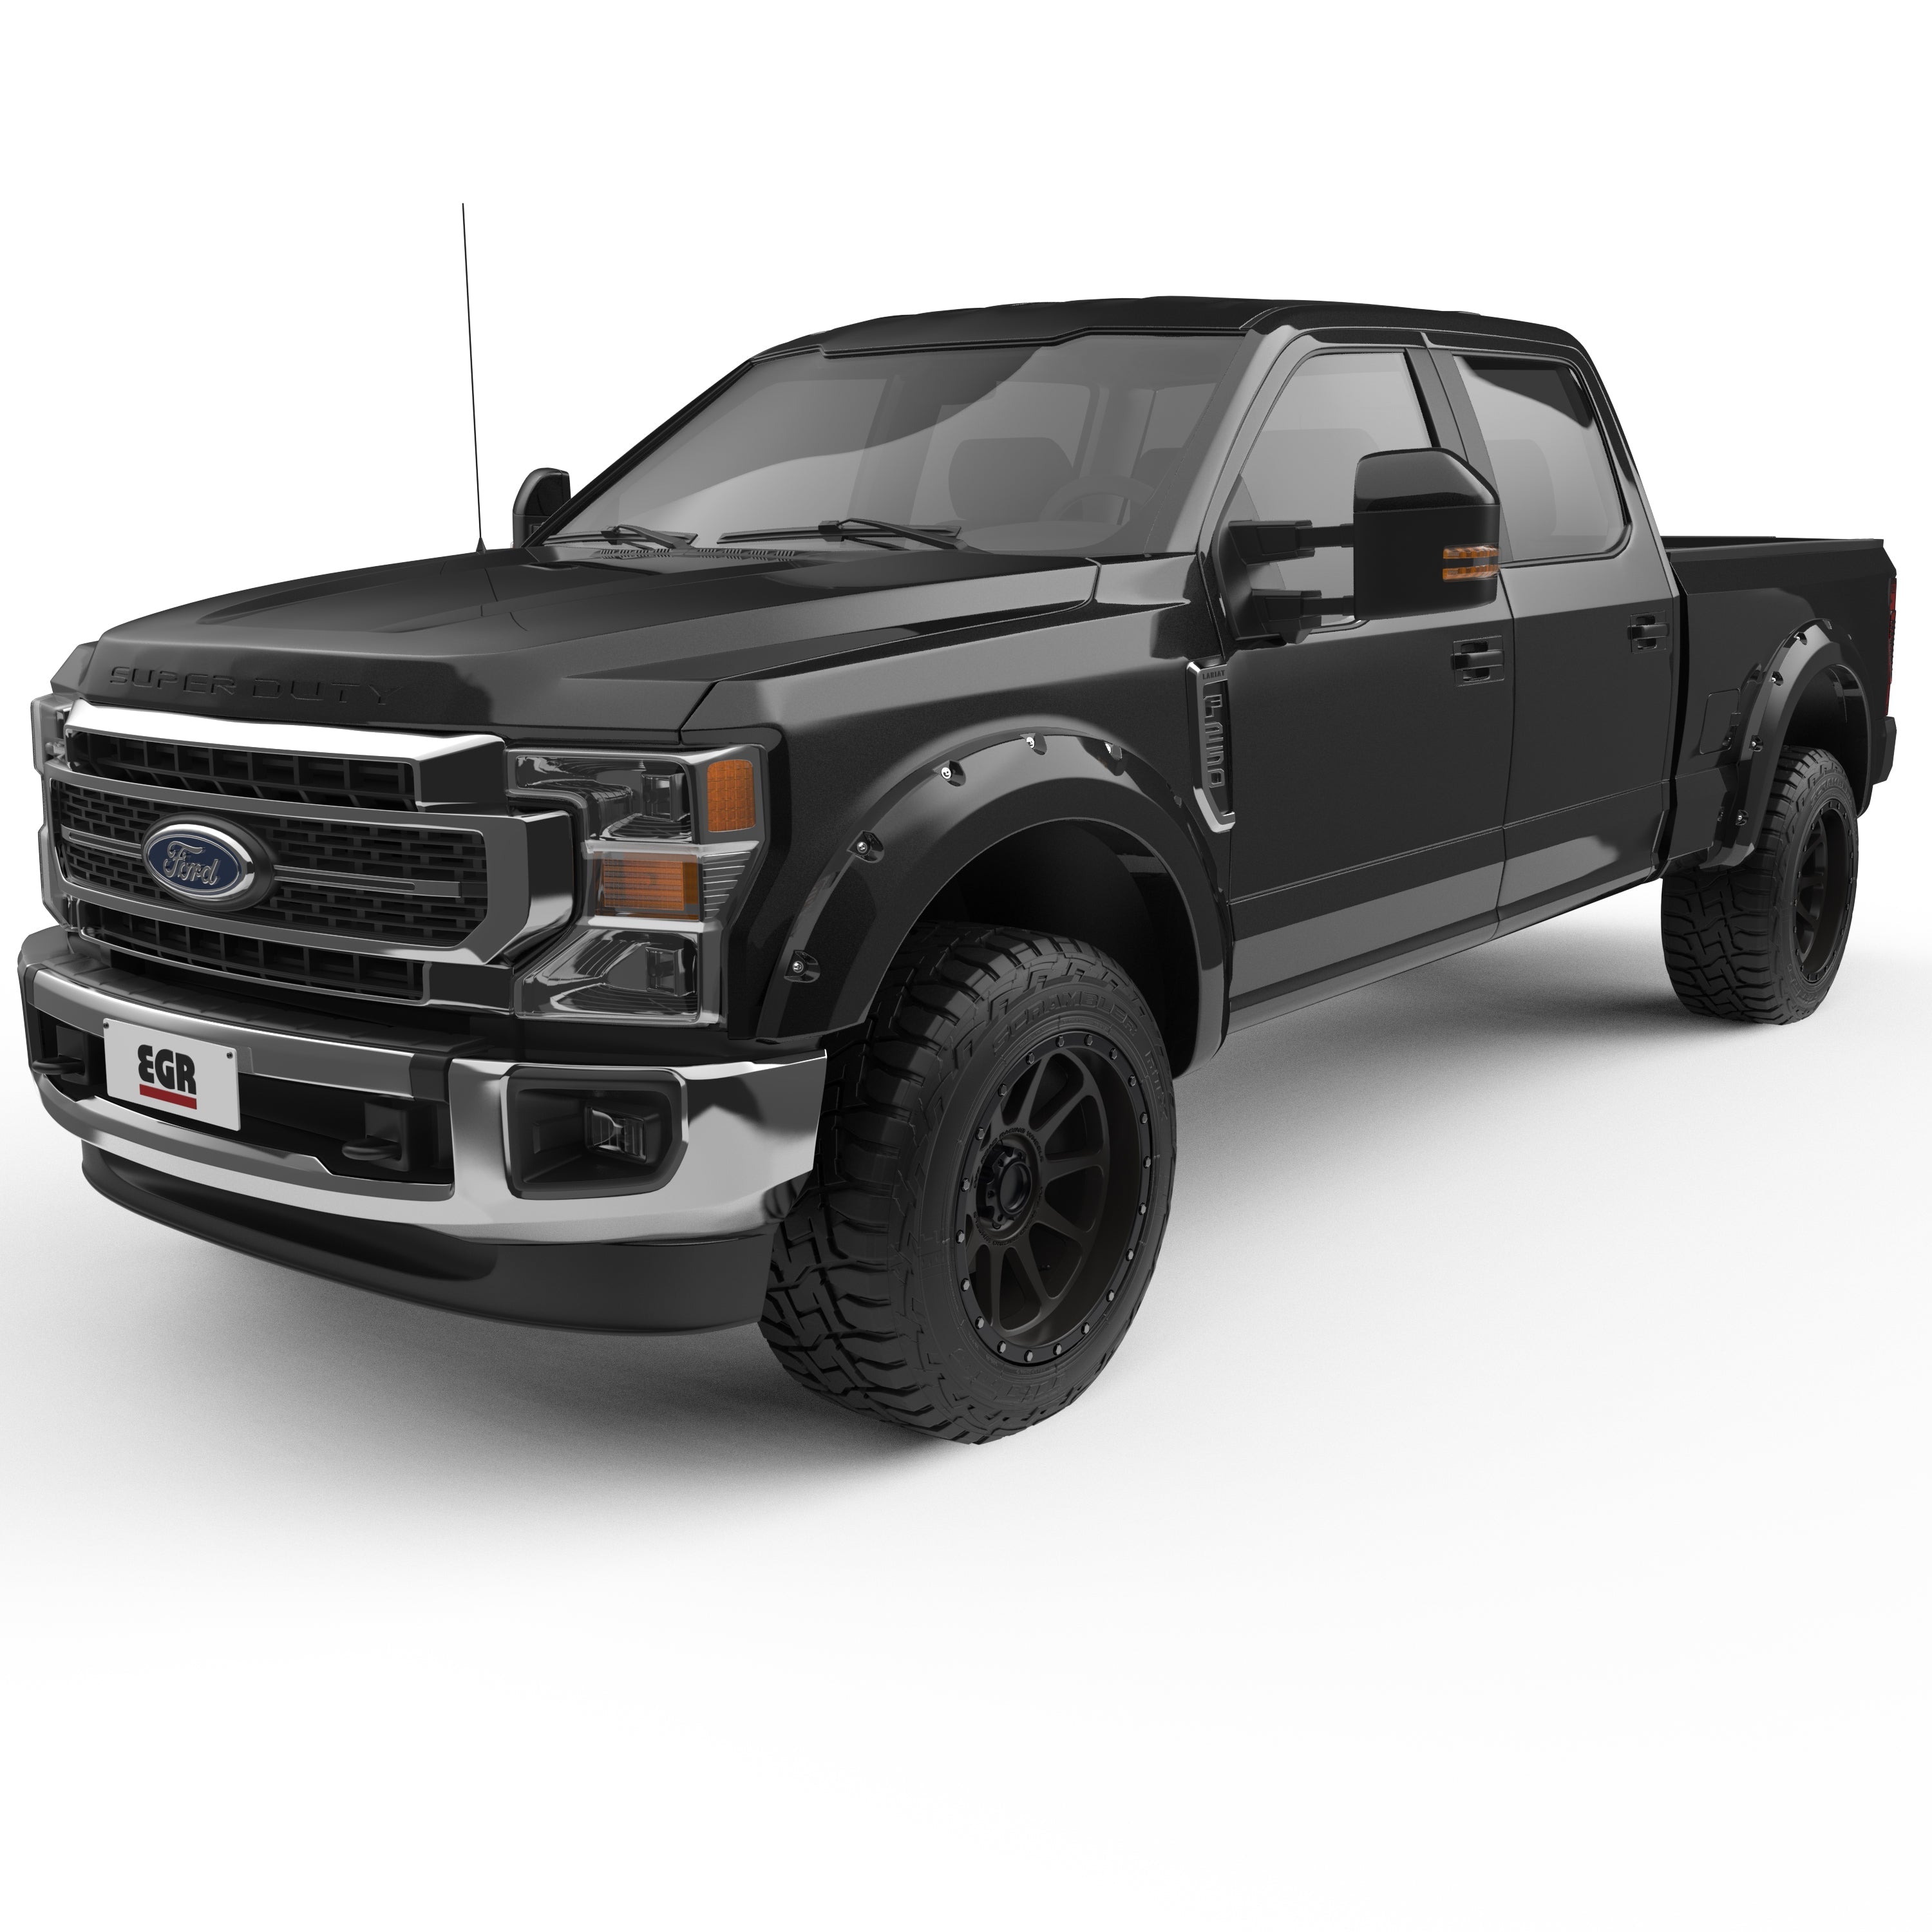 EGR 2011-2016 Ford F-250 F-350 Super Duty Extended Crew Standard Cab Pickup 2Door 4Door Painted To Code Black Traditional Bolt-On Look Fender Flares 793814-G1